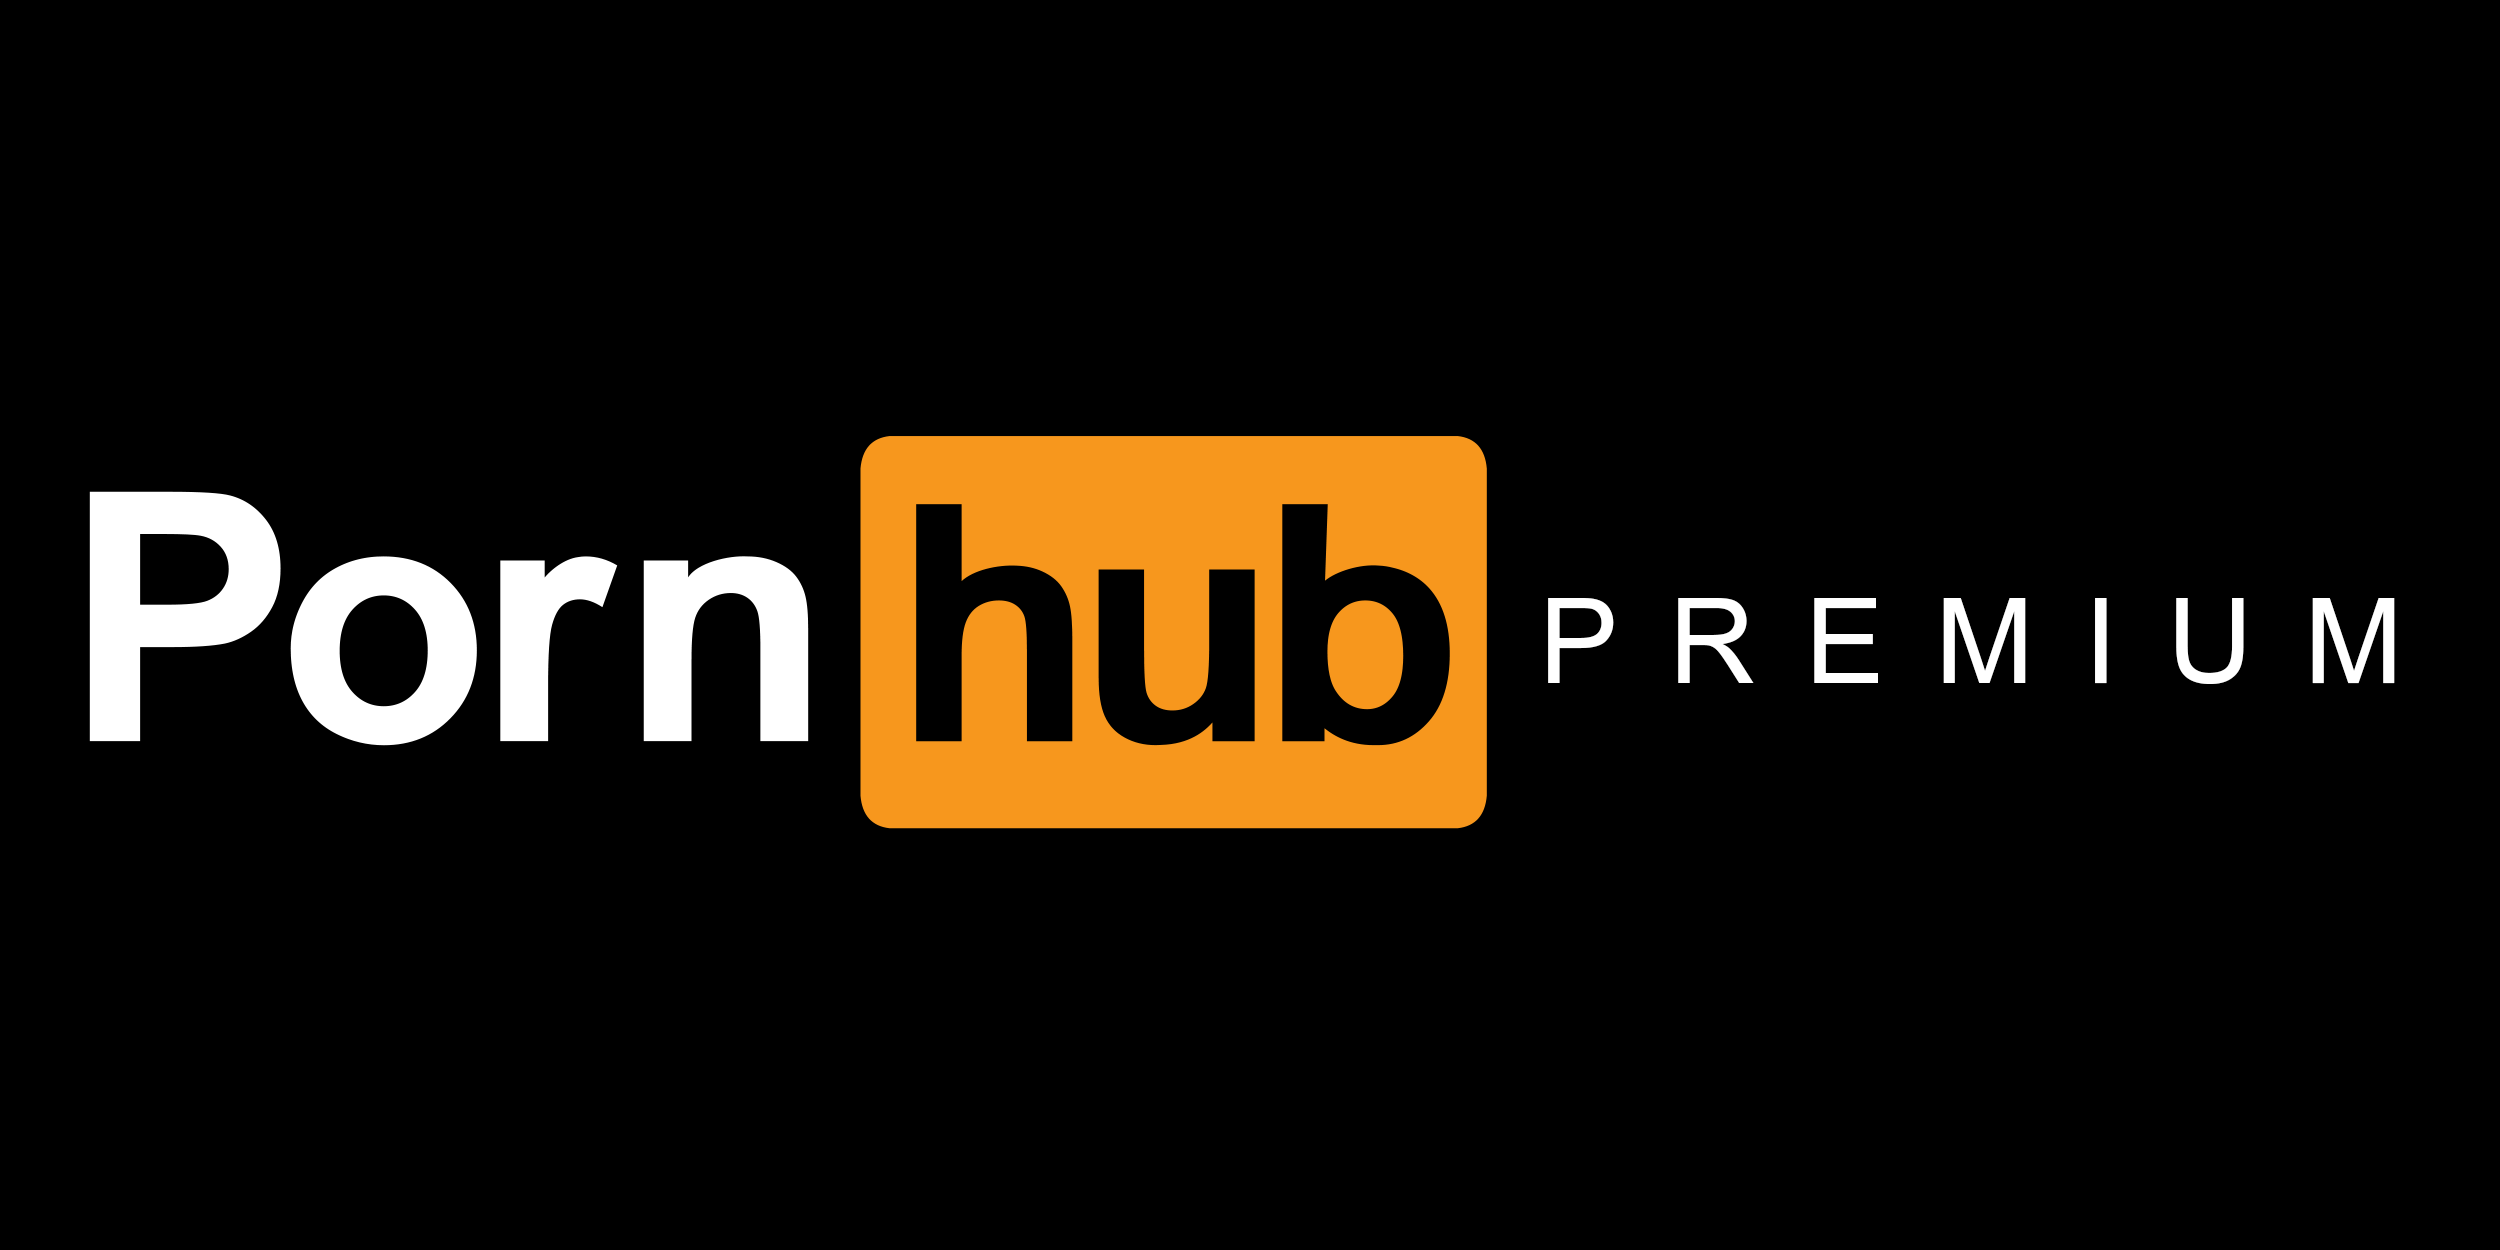 Is Pornhub Premium Worth It? Cost, Features, and Unexpected Benefits